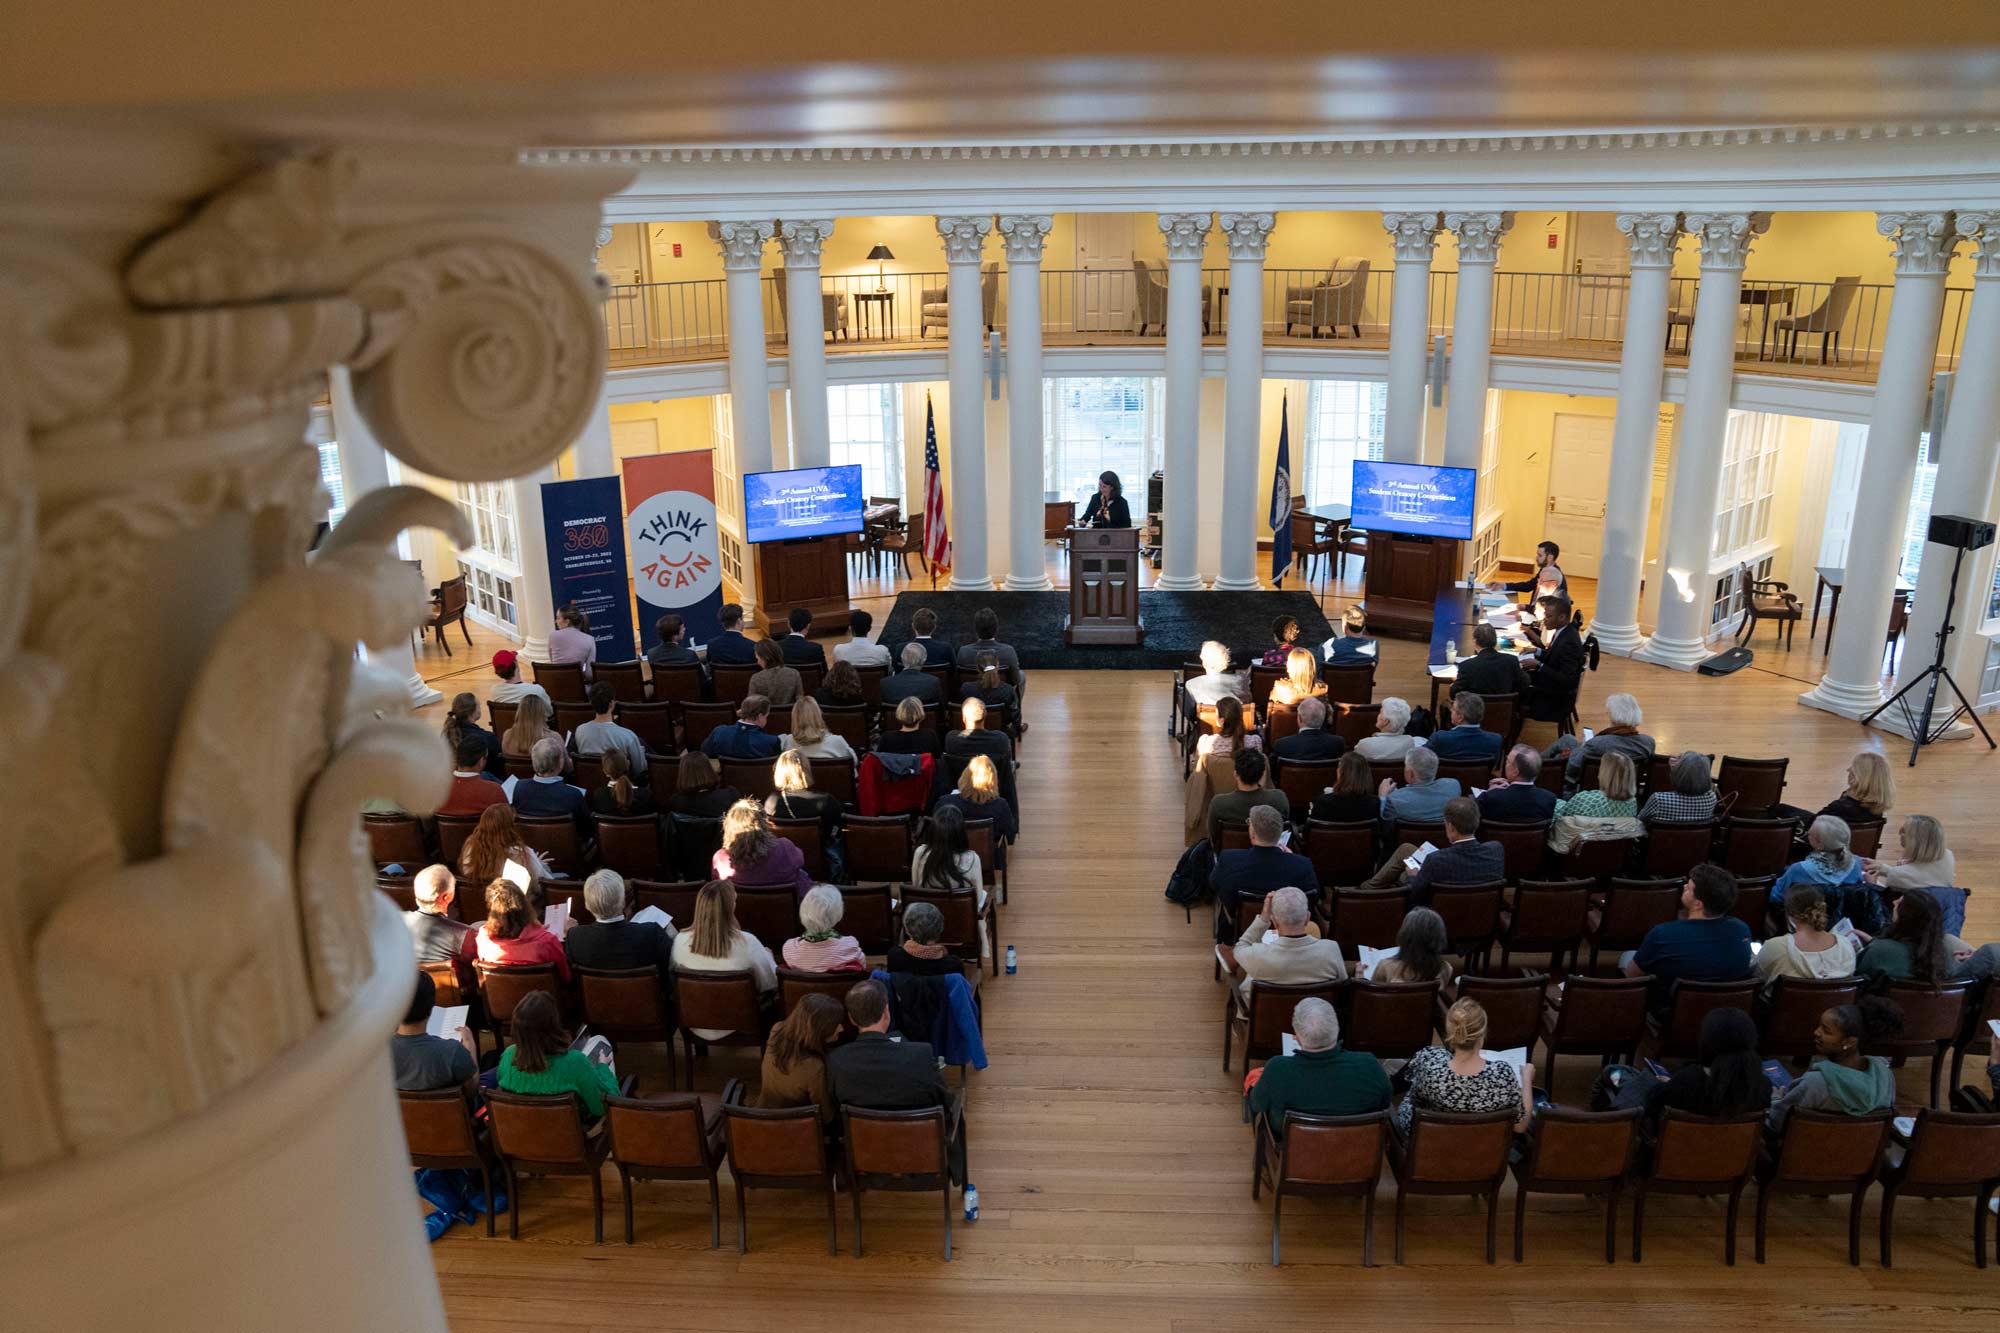 Above shot of the Rotunda dome room looking onto an audience and podium with a student speaker